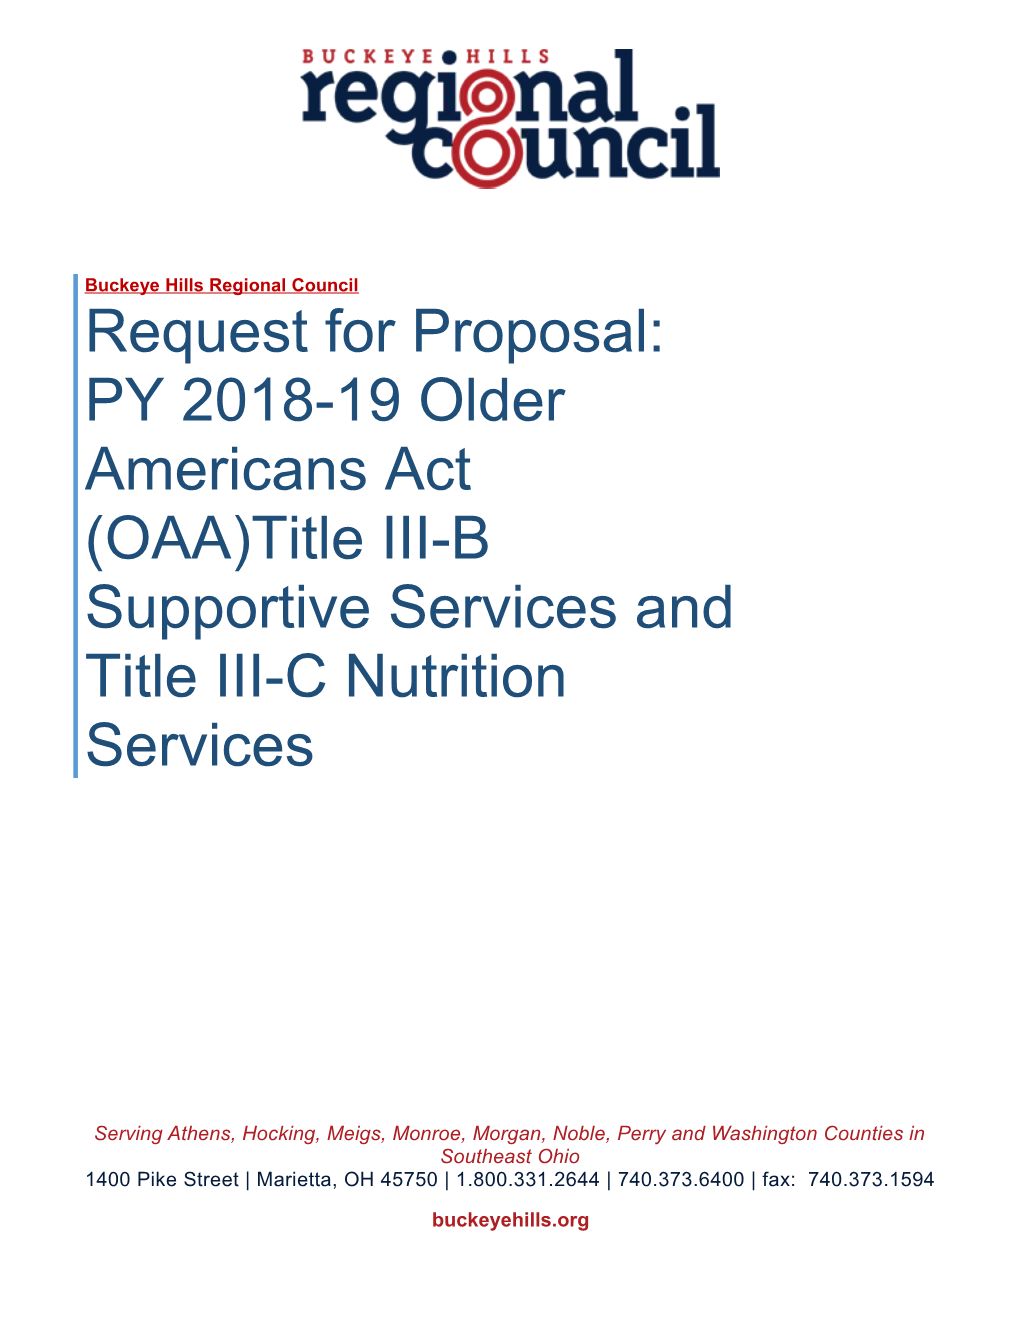 Request for Proposal: PY 2018-19 Older Americans Act (OAA)Title III-B Supportive Services